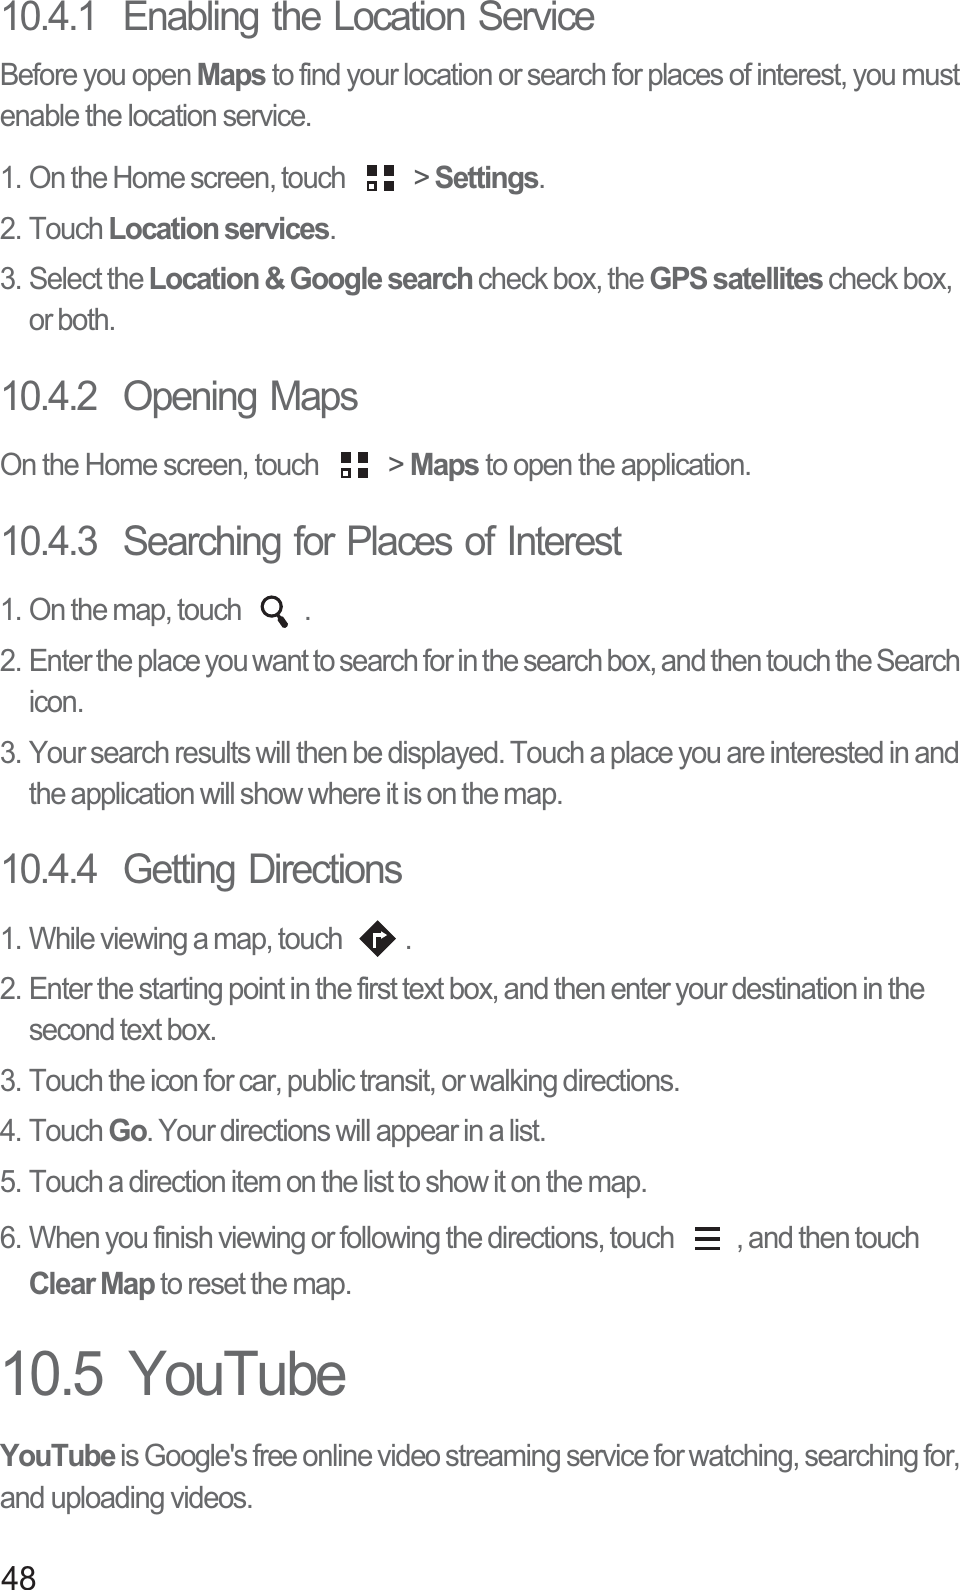 4810.4.1  Enabling the Location ServiceBefore you open Maps to find your location or search for places of interest, you must enable the location service.1. On the Home screen, touch   &gt; Settings.2. Touch Location services.3. Select the Location &amp; Google search check box, the GPS satellites check box, or both.10.4.2  Opening MapsOn the Home screen, touch   &gt; Maps to open the application.10.4.3  Searching for Places of Interest1. On the map, touch  .2. Enter the place you want to search for in the search box, and then touch the Search icon.3. Your search results will then be displayed. Touch a place you are interested in and the application will show where it is on the map.10.4.4  Getting Directions1. While viewing a map, touch  .2. Enter the starting point in the first text box, and then enter your destination in the second text box.3. Touch the icon for car, public transit, or walking directions.4. Touch Go. Your directions will appear in a list.5. Touch a direction item on the list to show it on the map.6. When you finish viewing or following the directions, touch  , and then touch Clear Map to reset the map.10.5  YouTubeYouTube is Google&apos;s free online video streaming service for watching, searching for, and uploading videos.